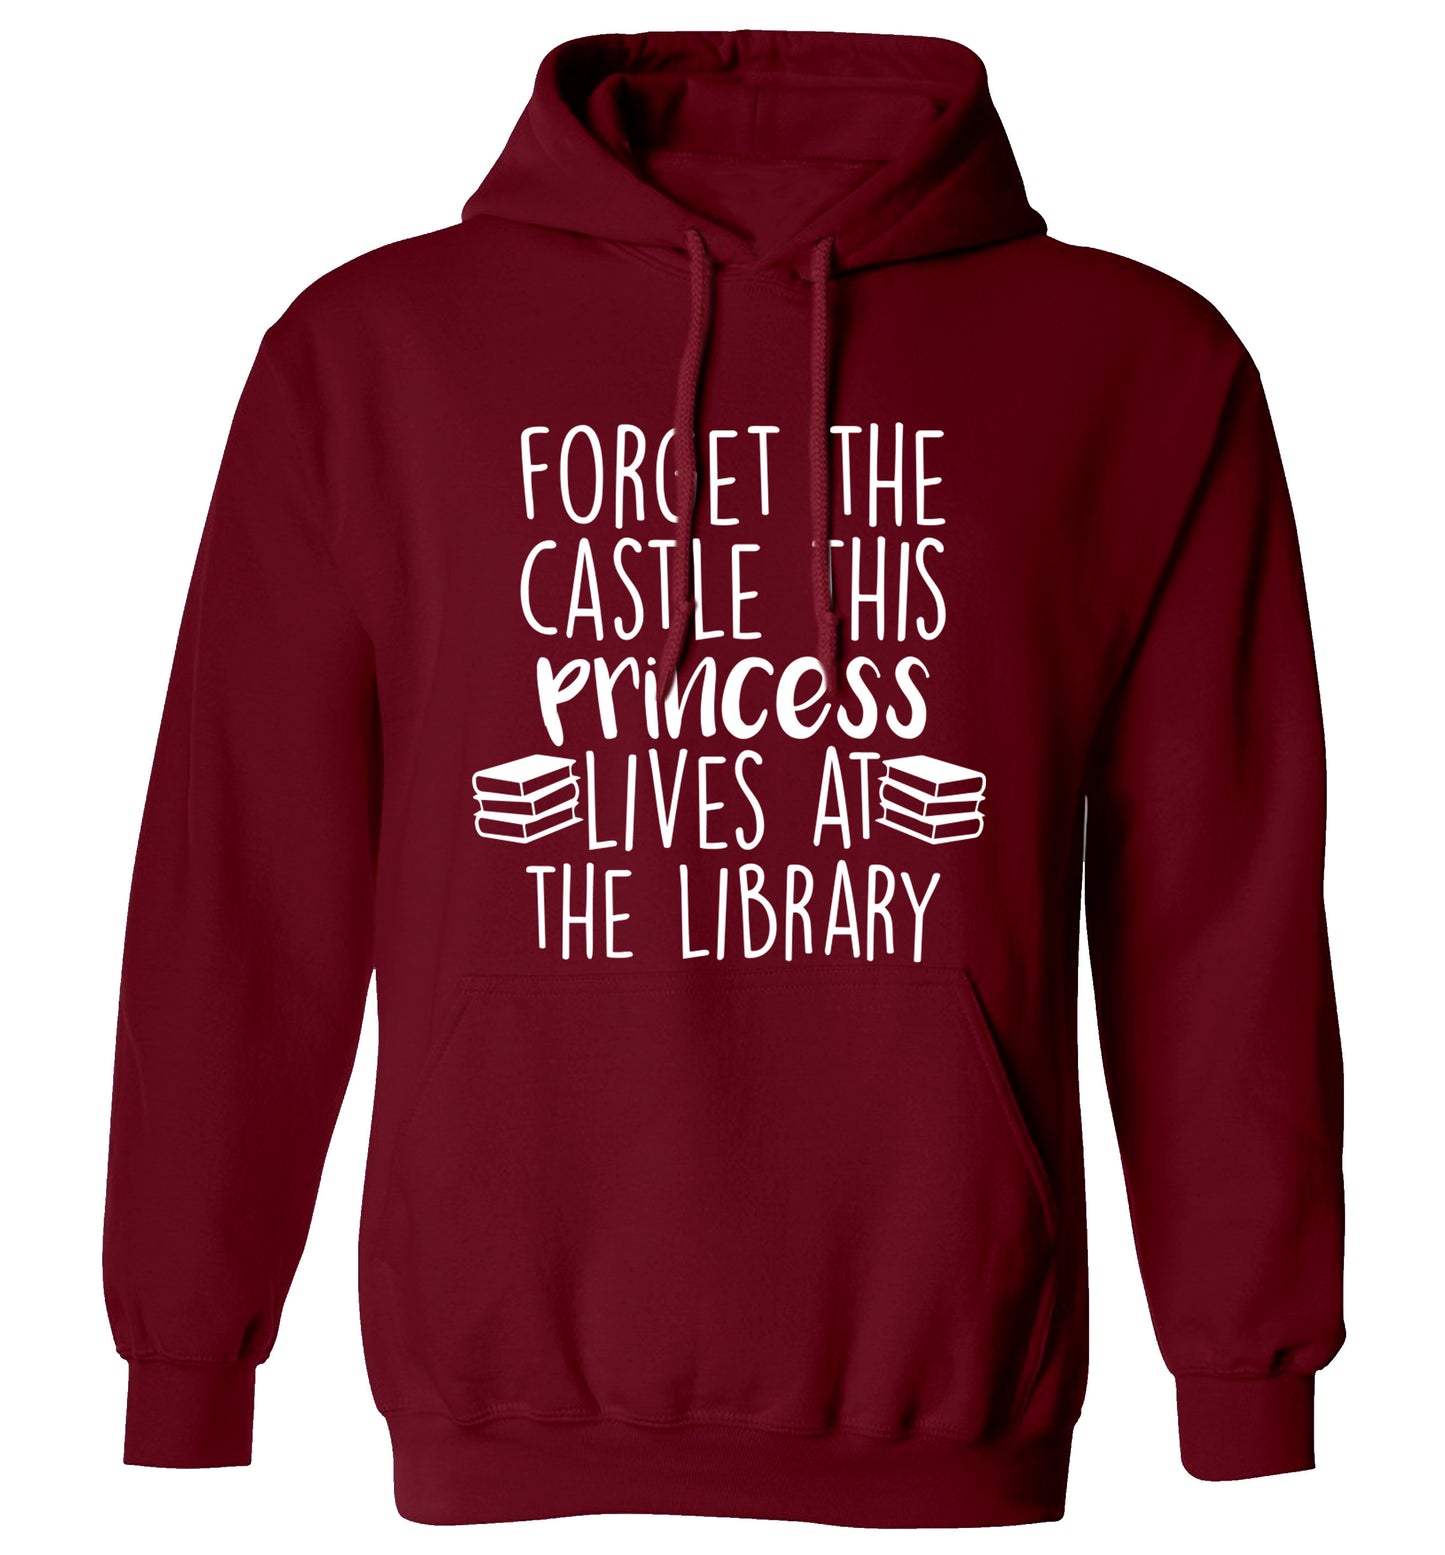 Forget the castle this princess lives at the library adults unisex maroon hoodie 2XL